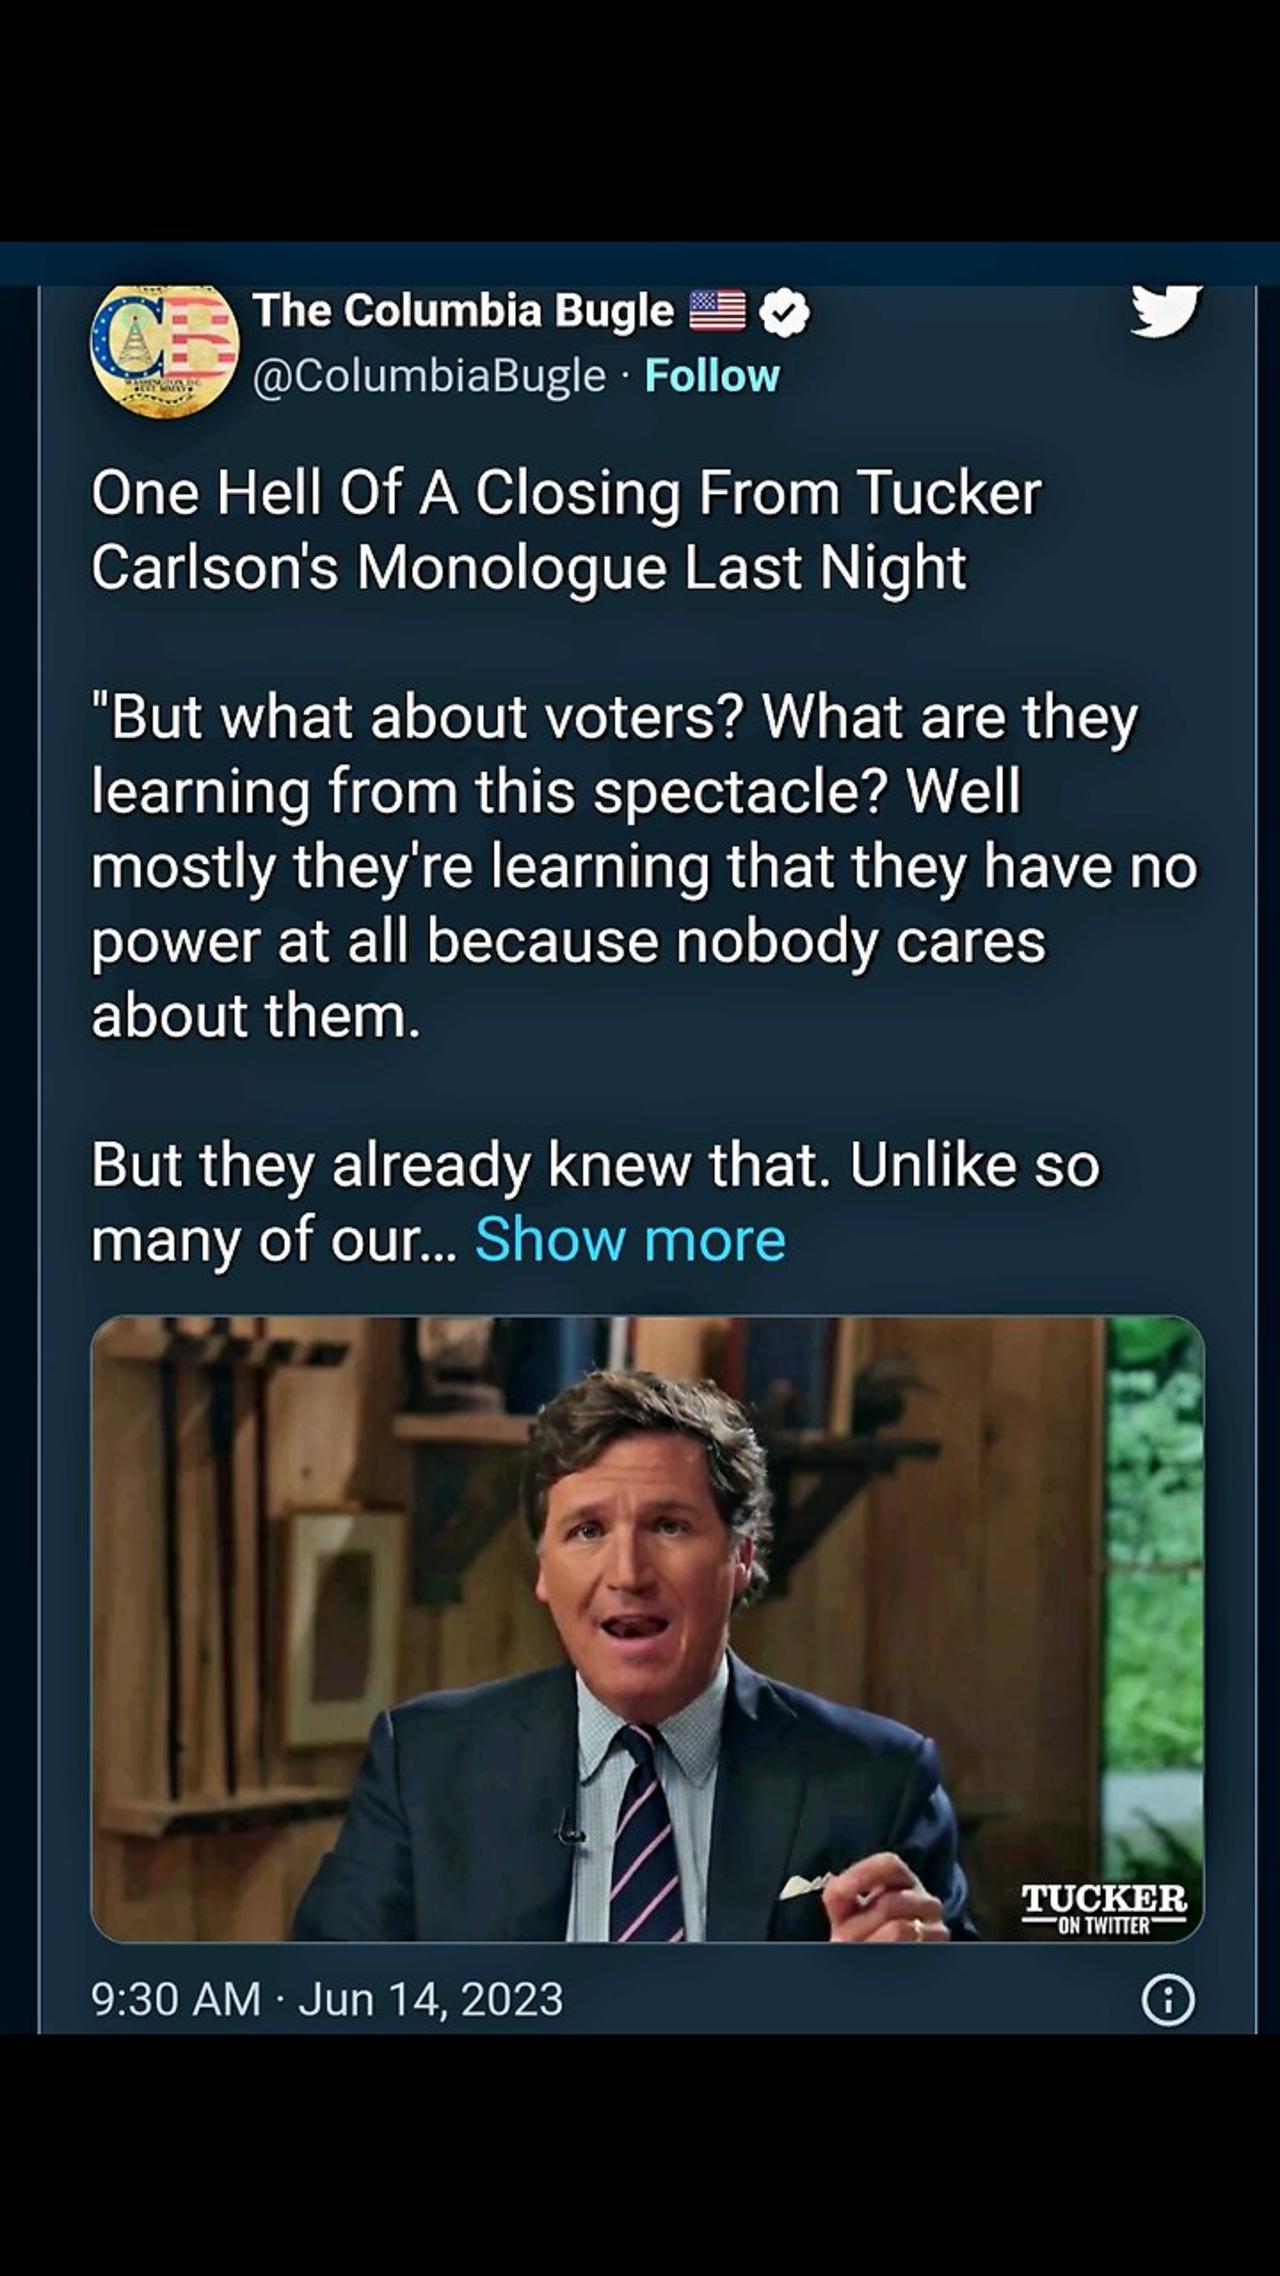 One Hell Of A Closing From Tucker Carlson's Monologue Last Night